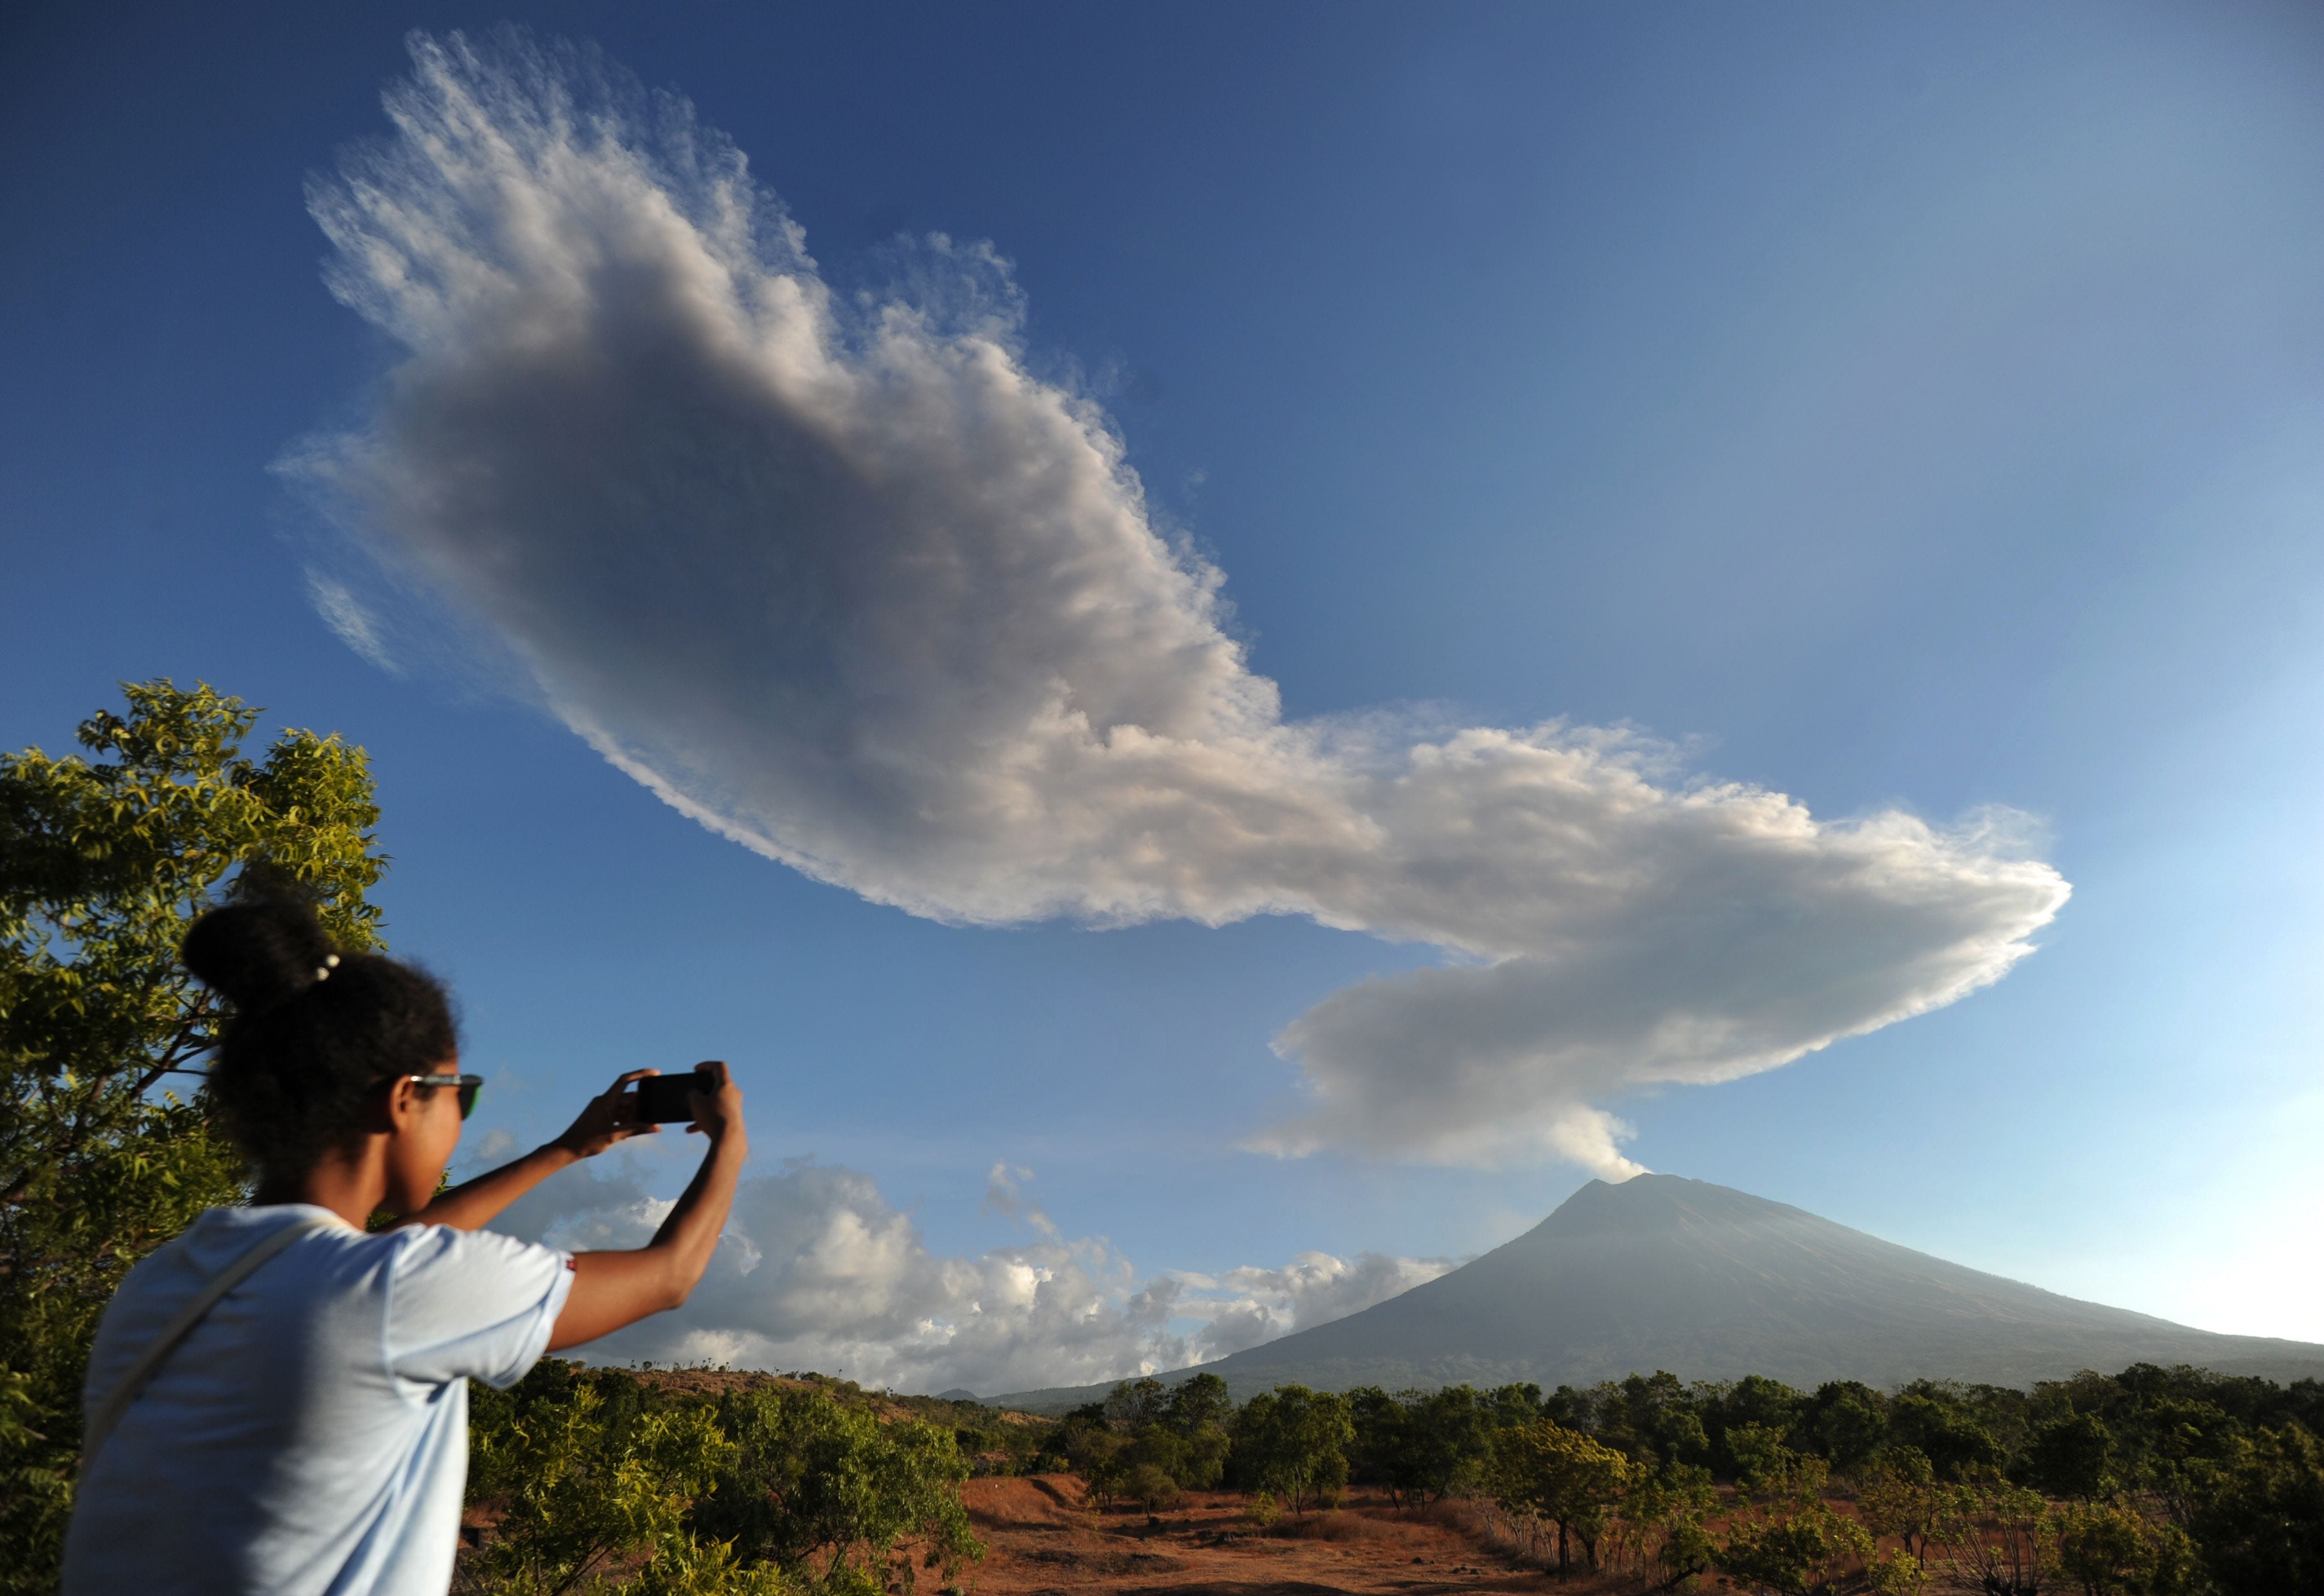 A woman photographs the Mount Agung volcano sending up a plume of smoke on Indonesia's resort island of Bali. Mount Agung roared to life again on July 2, belching a plume of ash 6,500 feet high.